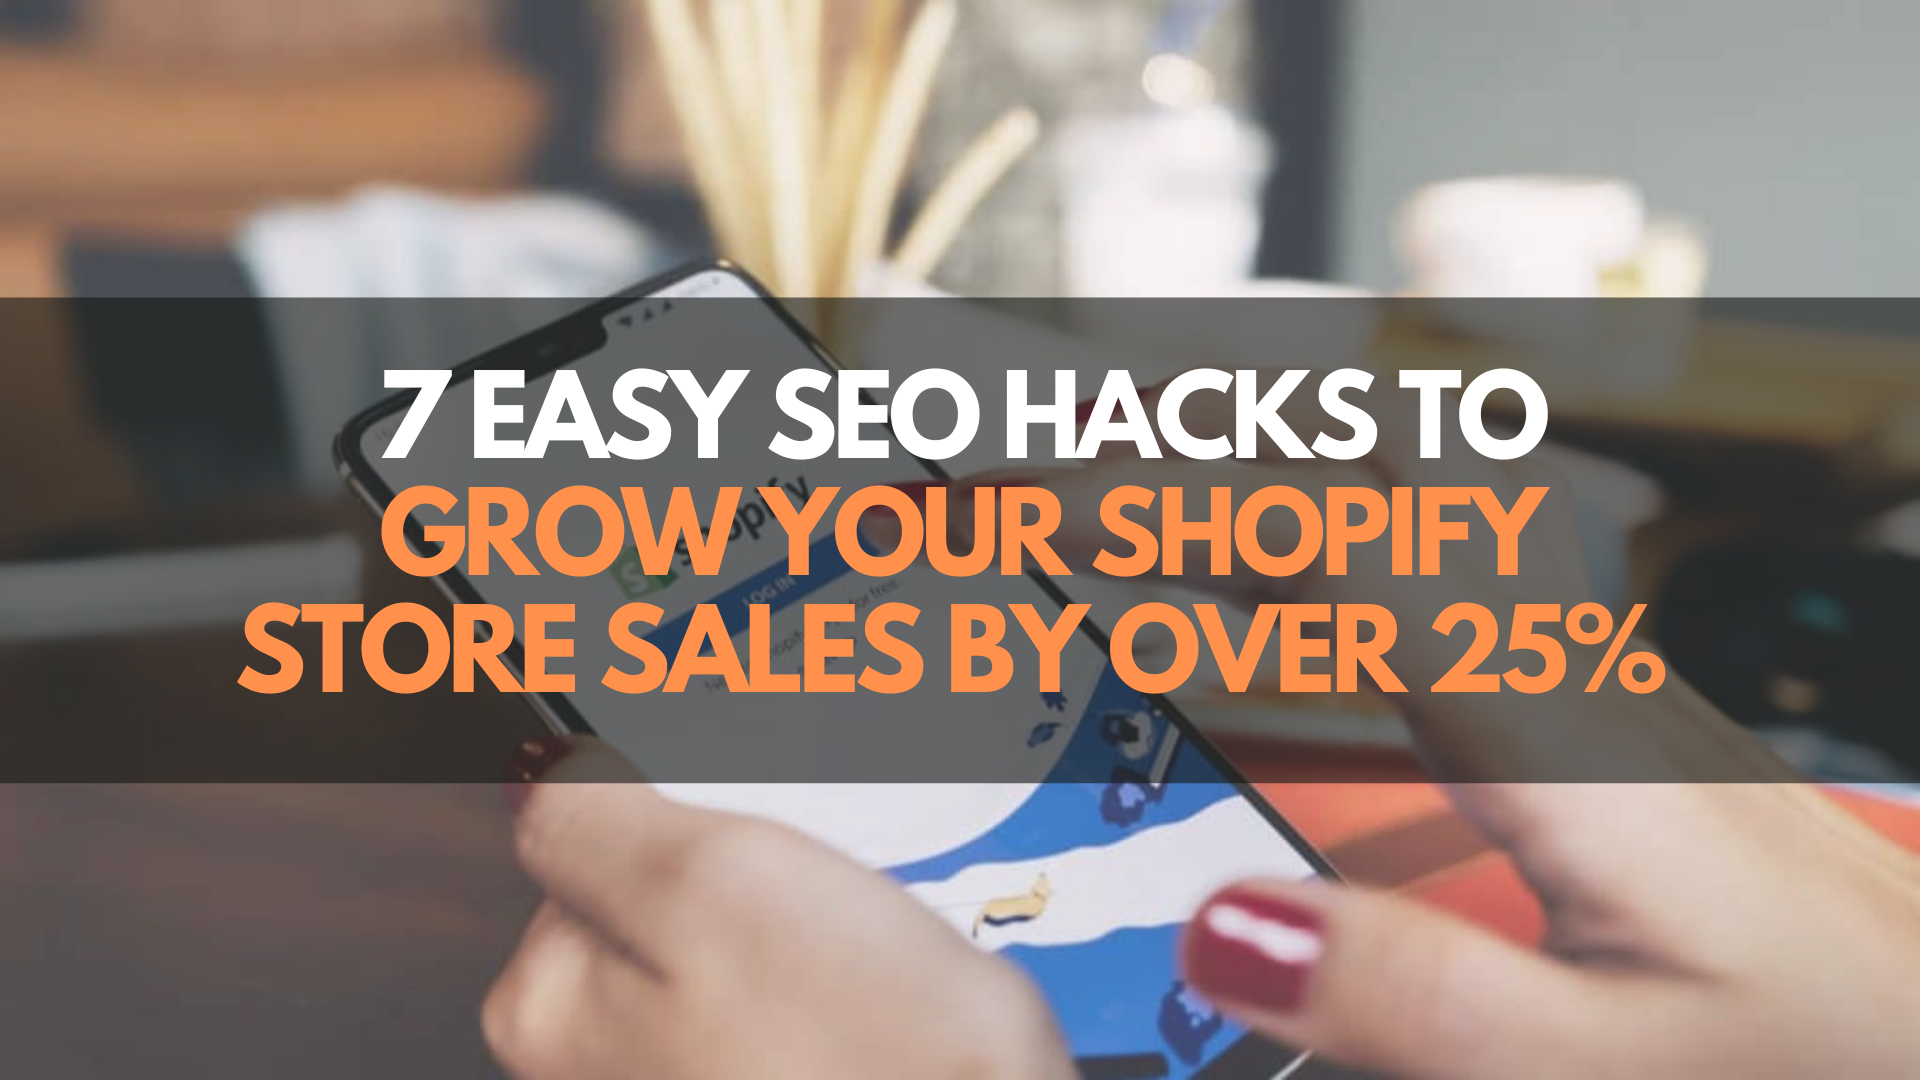 7 Easy SEO Hacks To Grow Your Shopify Store Sales by Over 25%